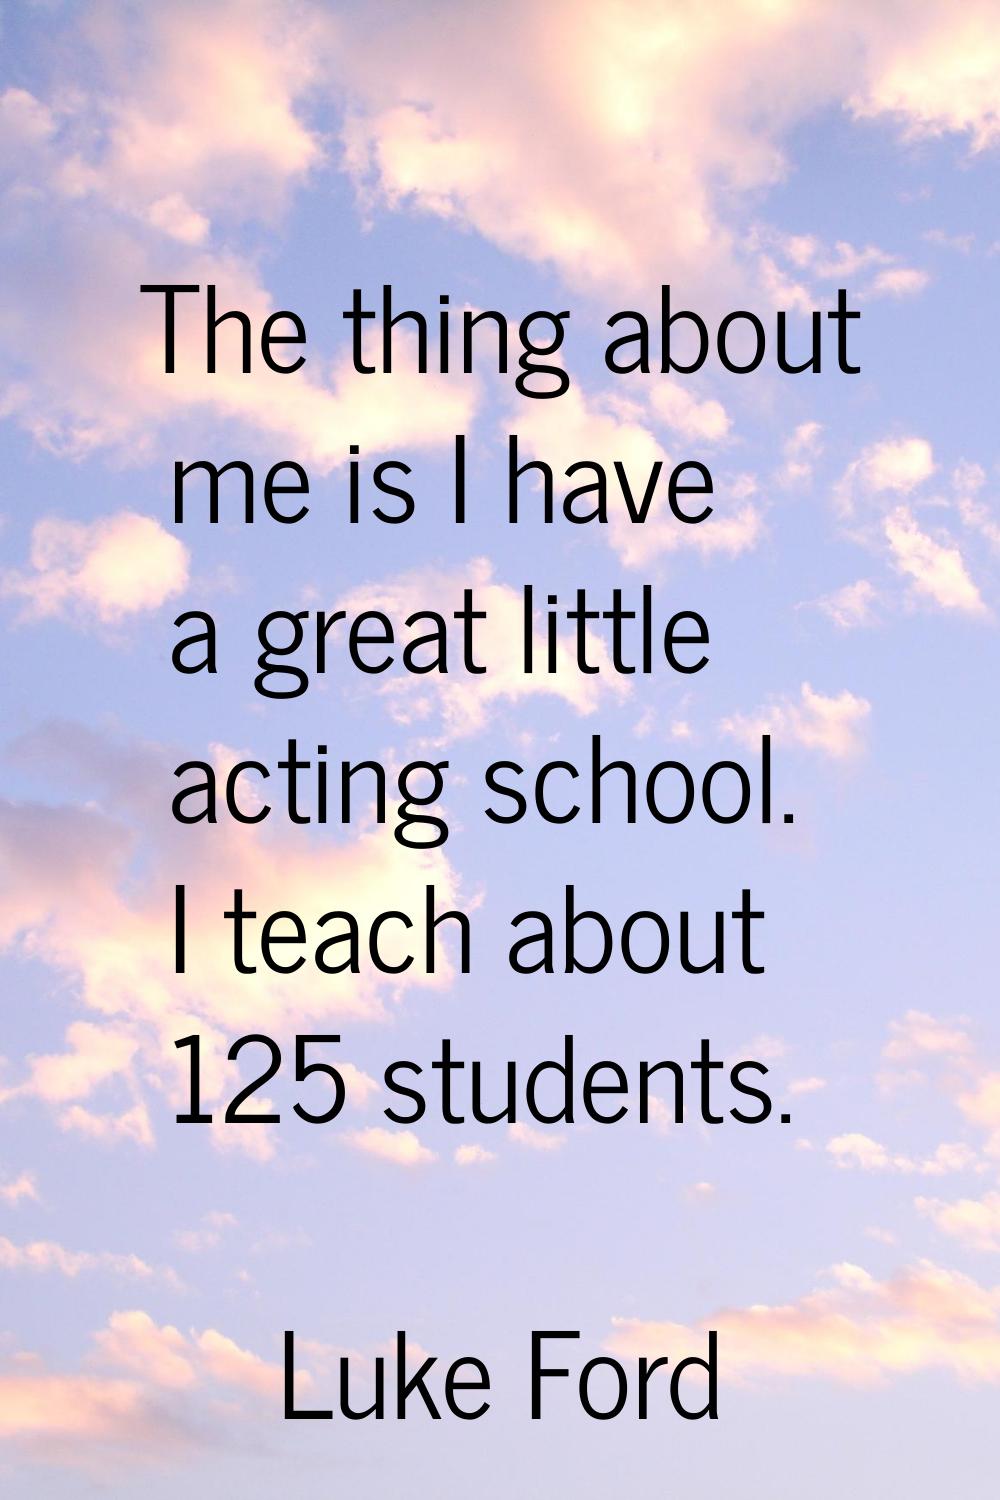 The thing about me is I have a great little acting school. I teach about 125 students.